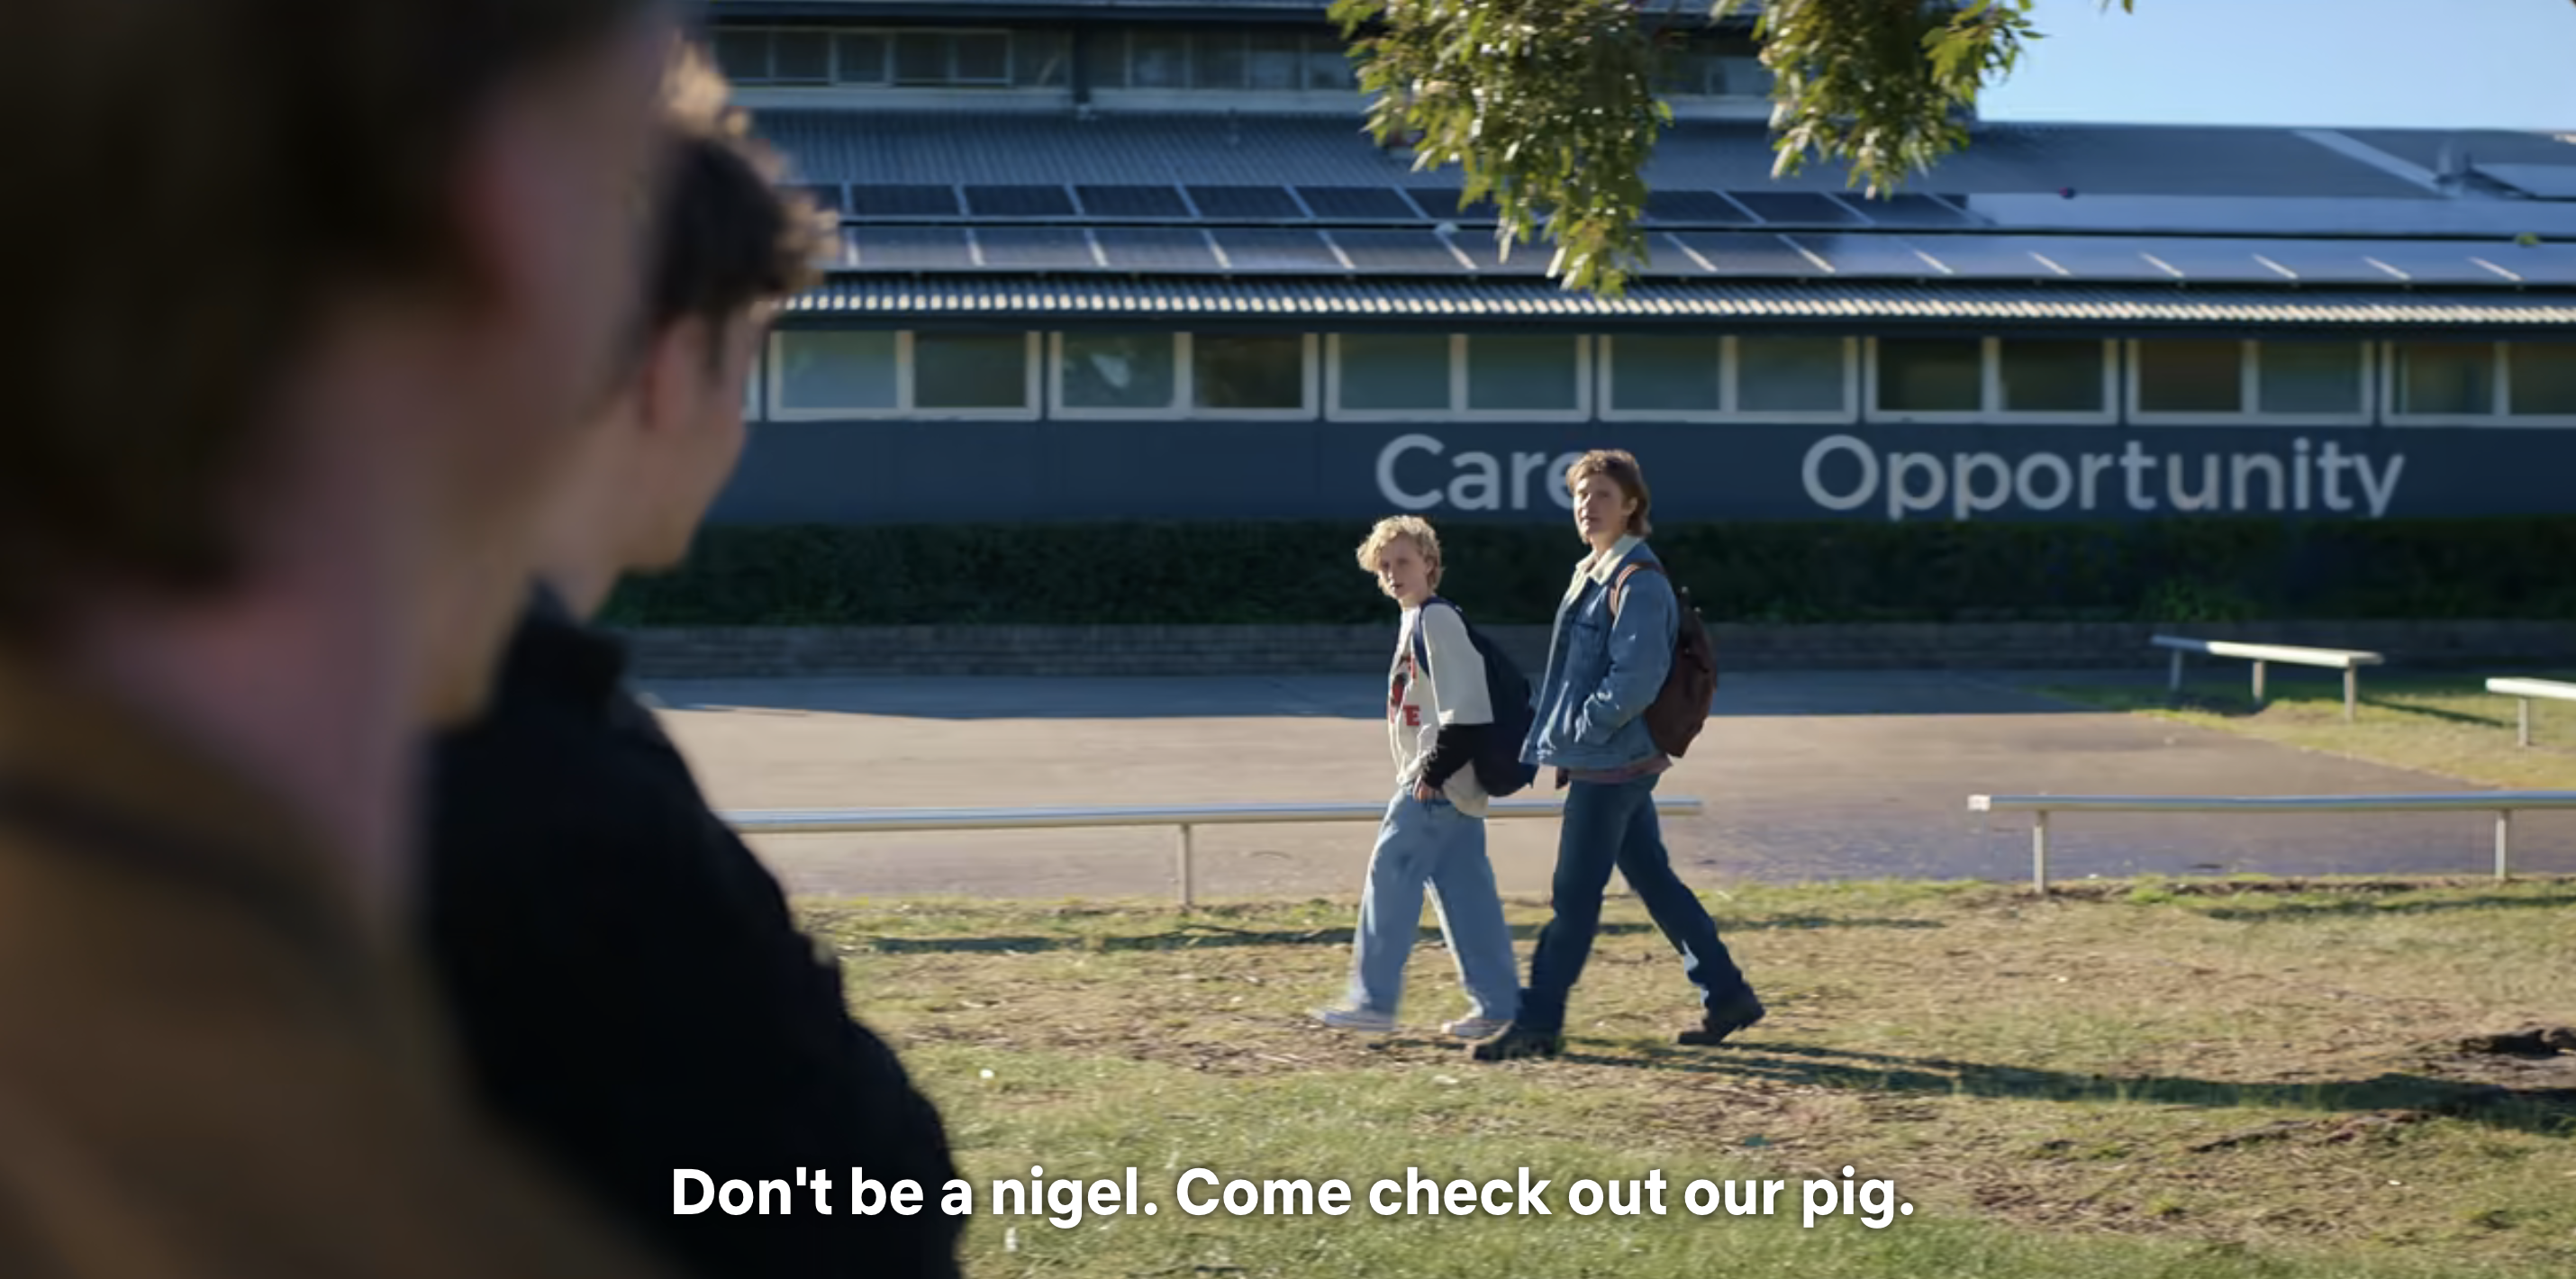 Two actors from a TV show walk and talk outside a school with captions displaying dialogue